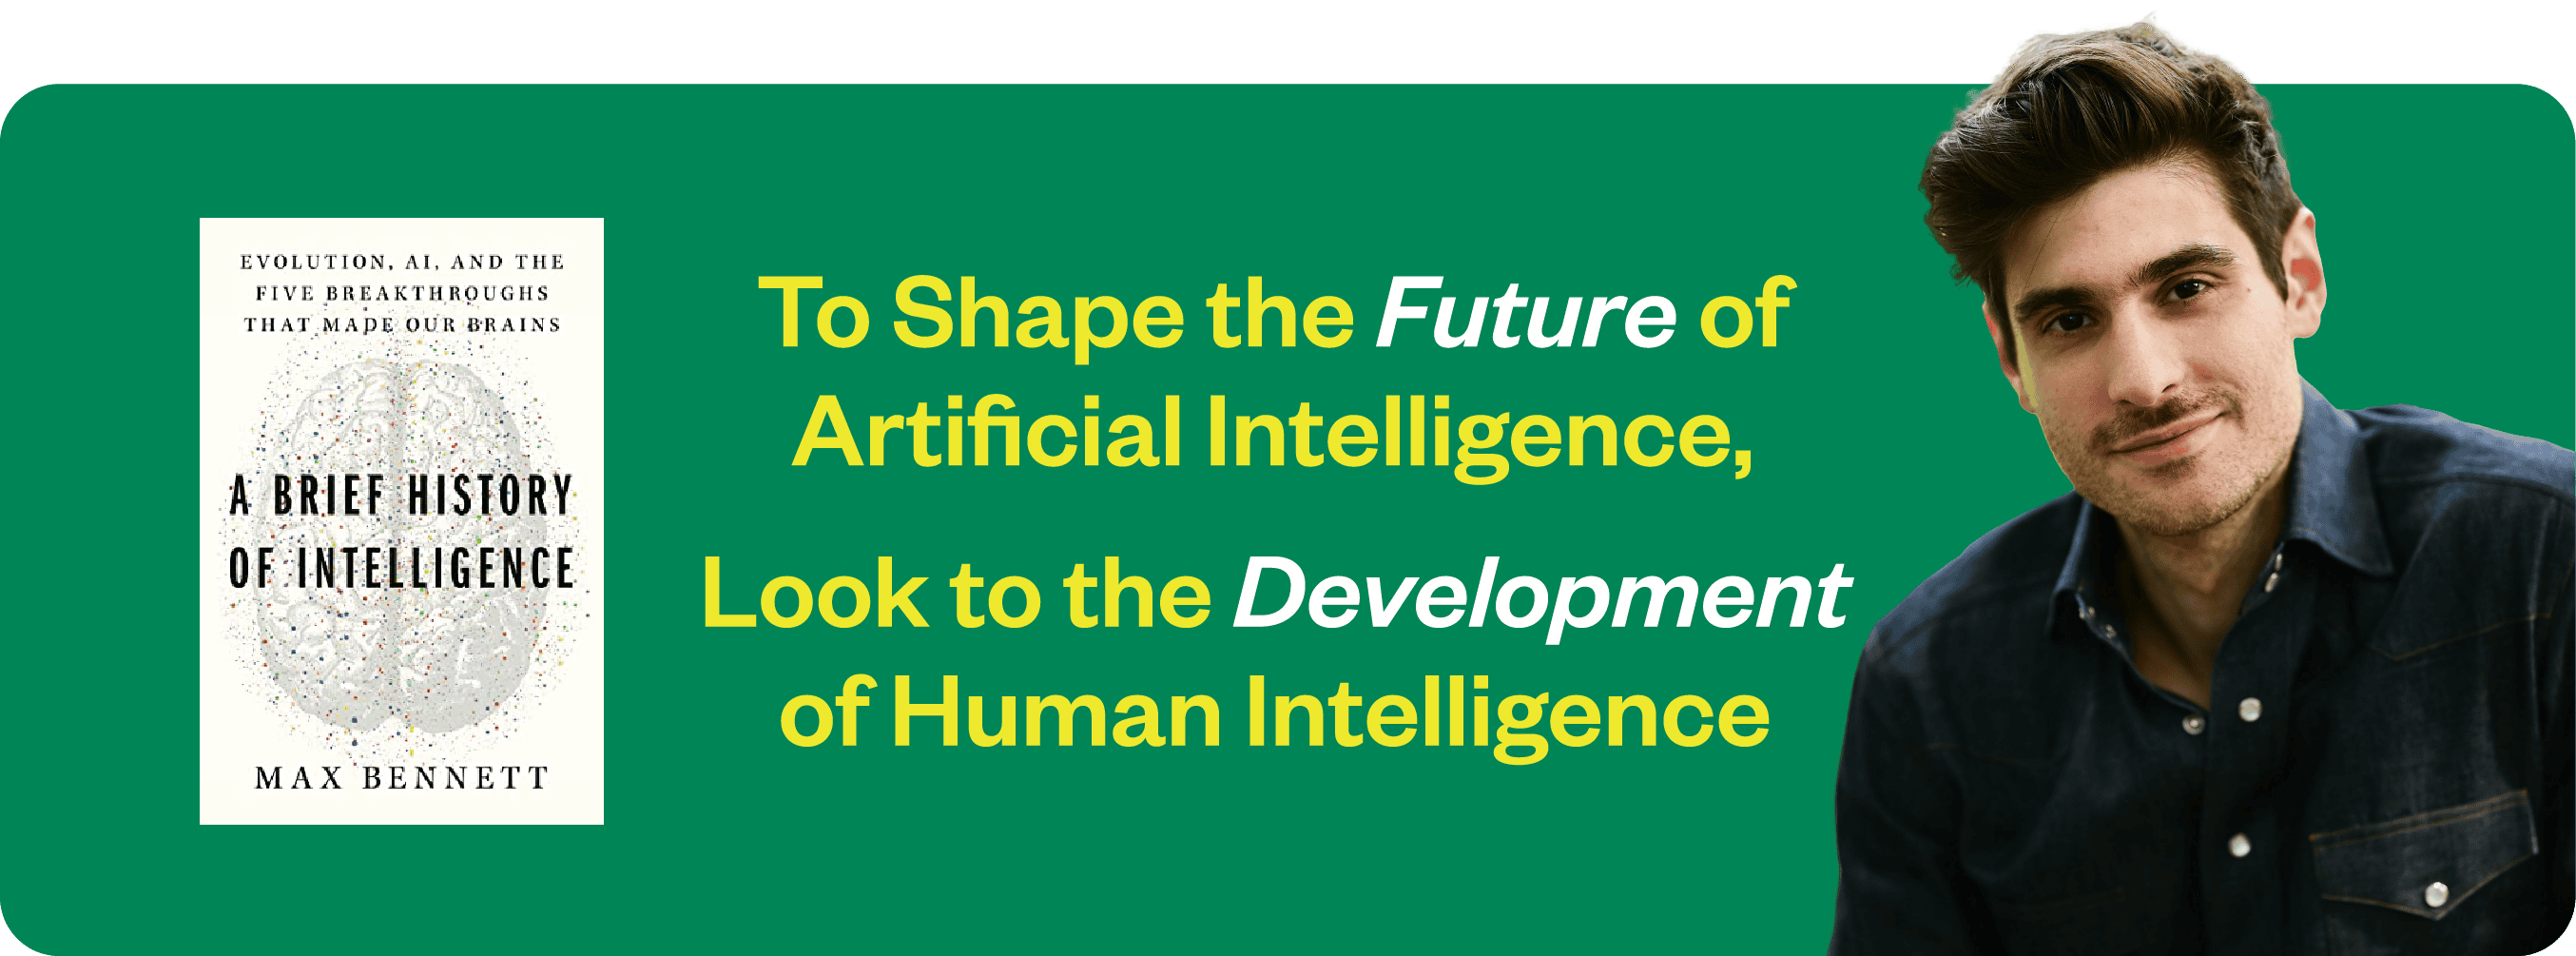 To Shape the Future of AI, Look to the History of Human Intelligence. AI Unicorn Founder Max Bennett